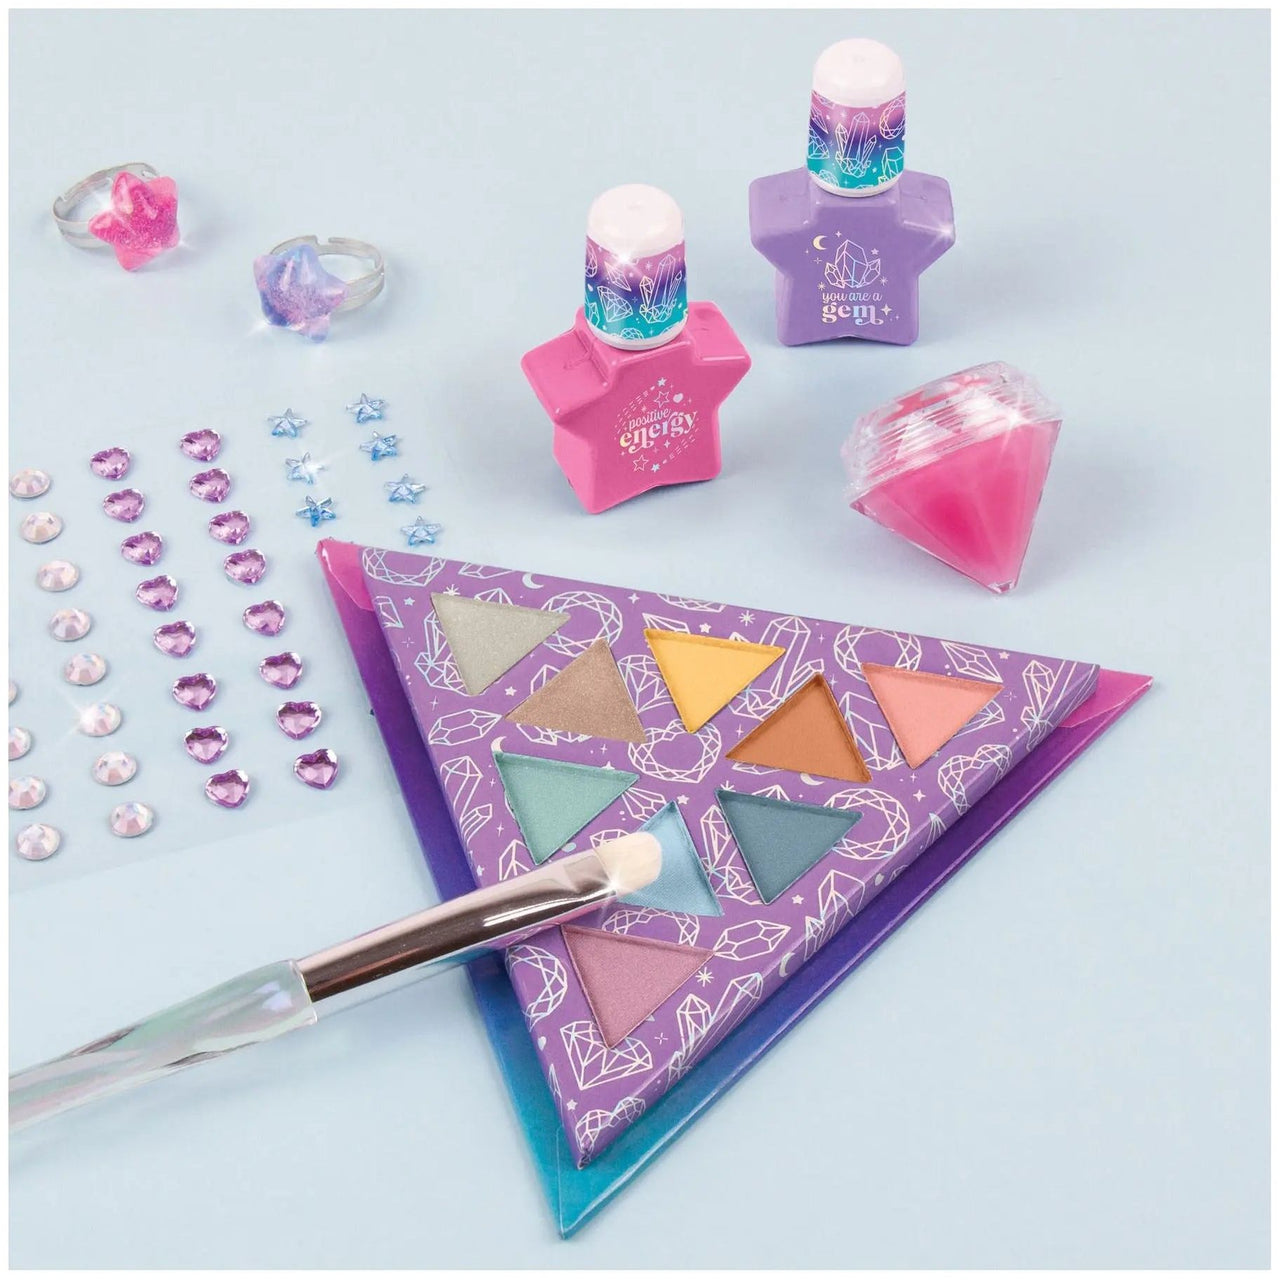 Mystic Crystal Makeup Set with Face Jewels Make It Real